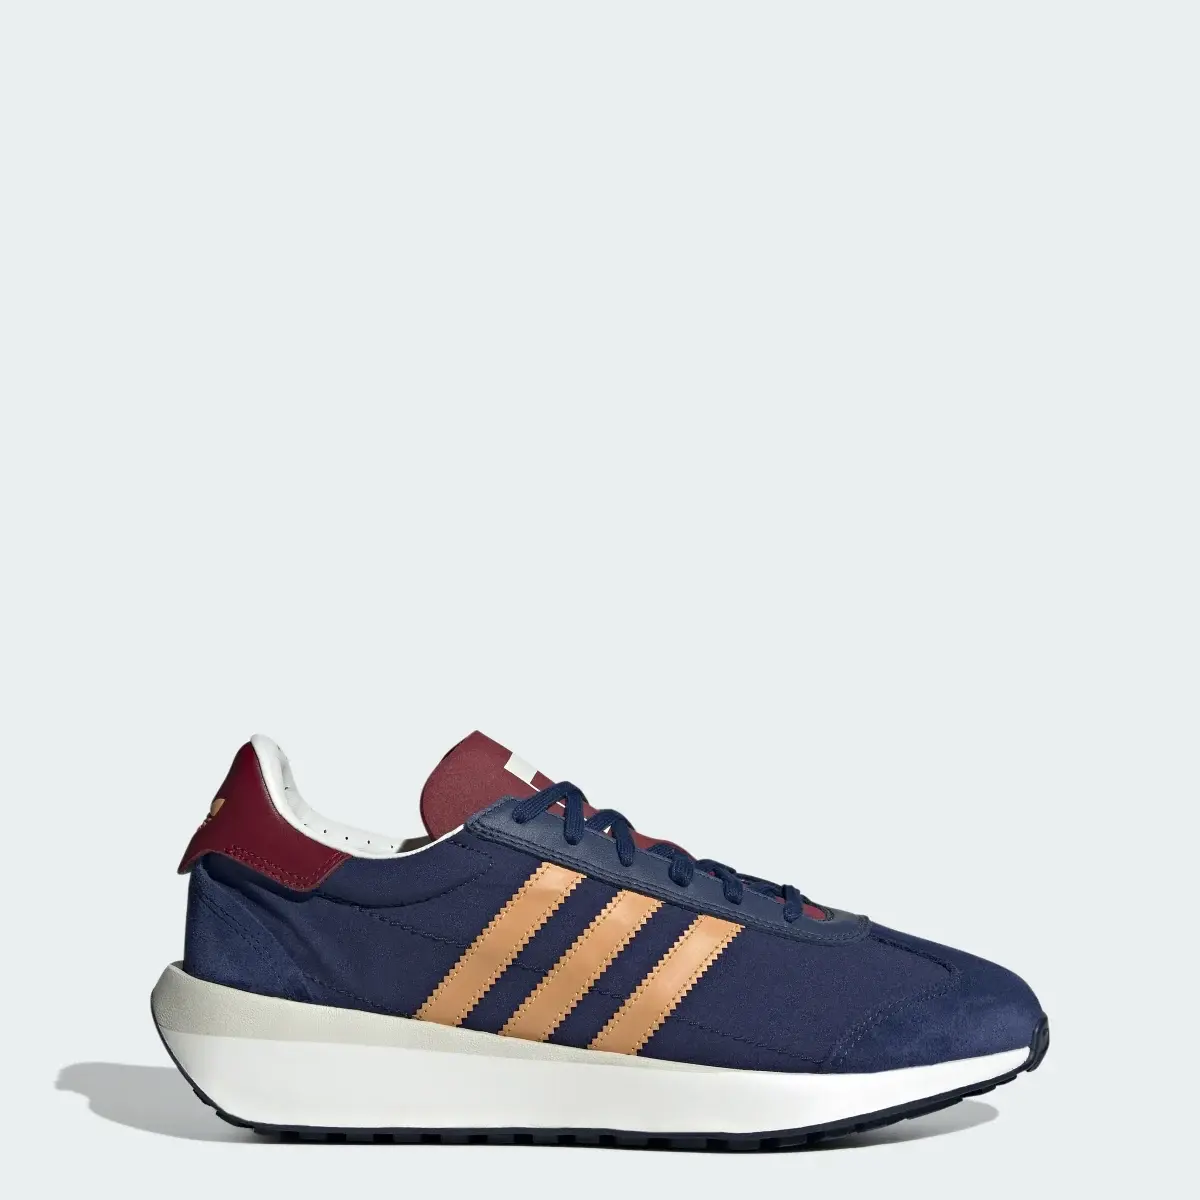 Adidas Country XLG Shoes. 1